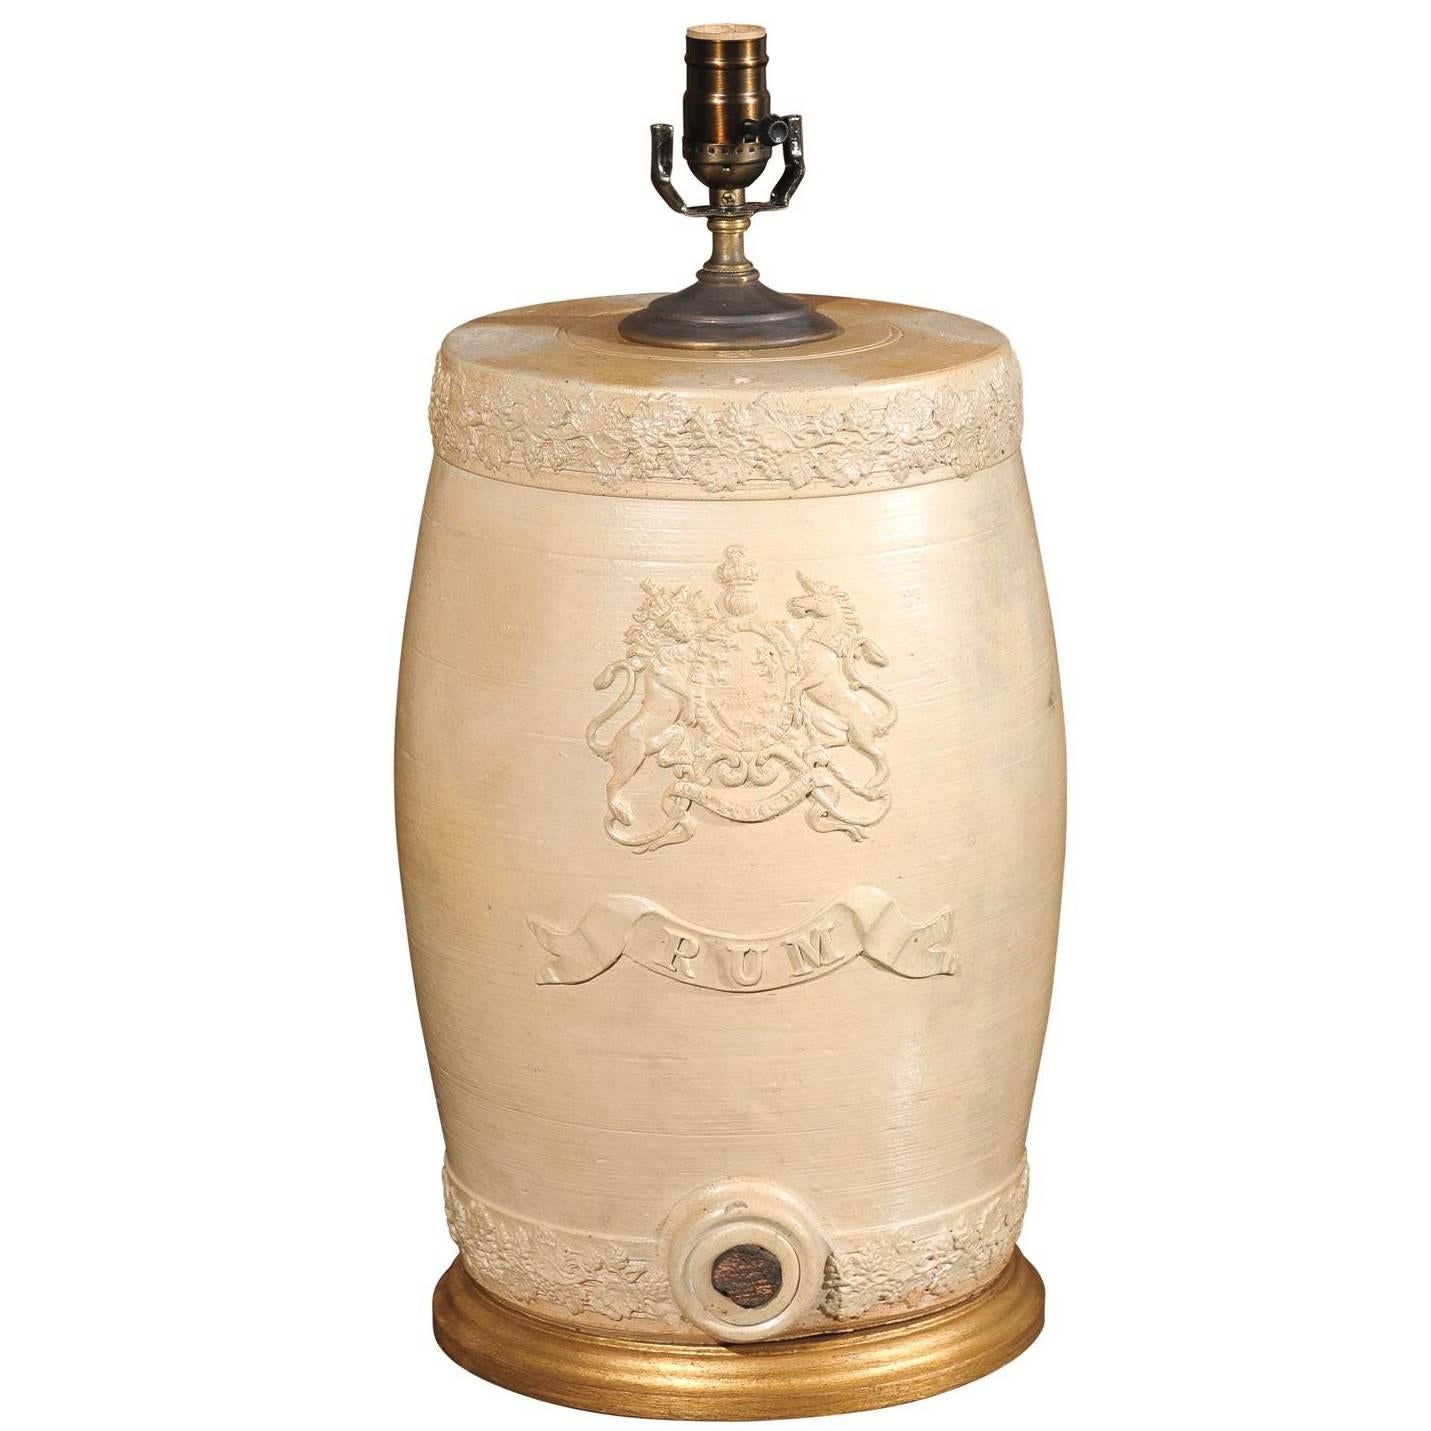 English Stoneware Spirit Barrel Table Lamp from the Mid-19th Century